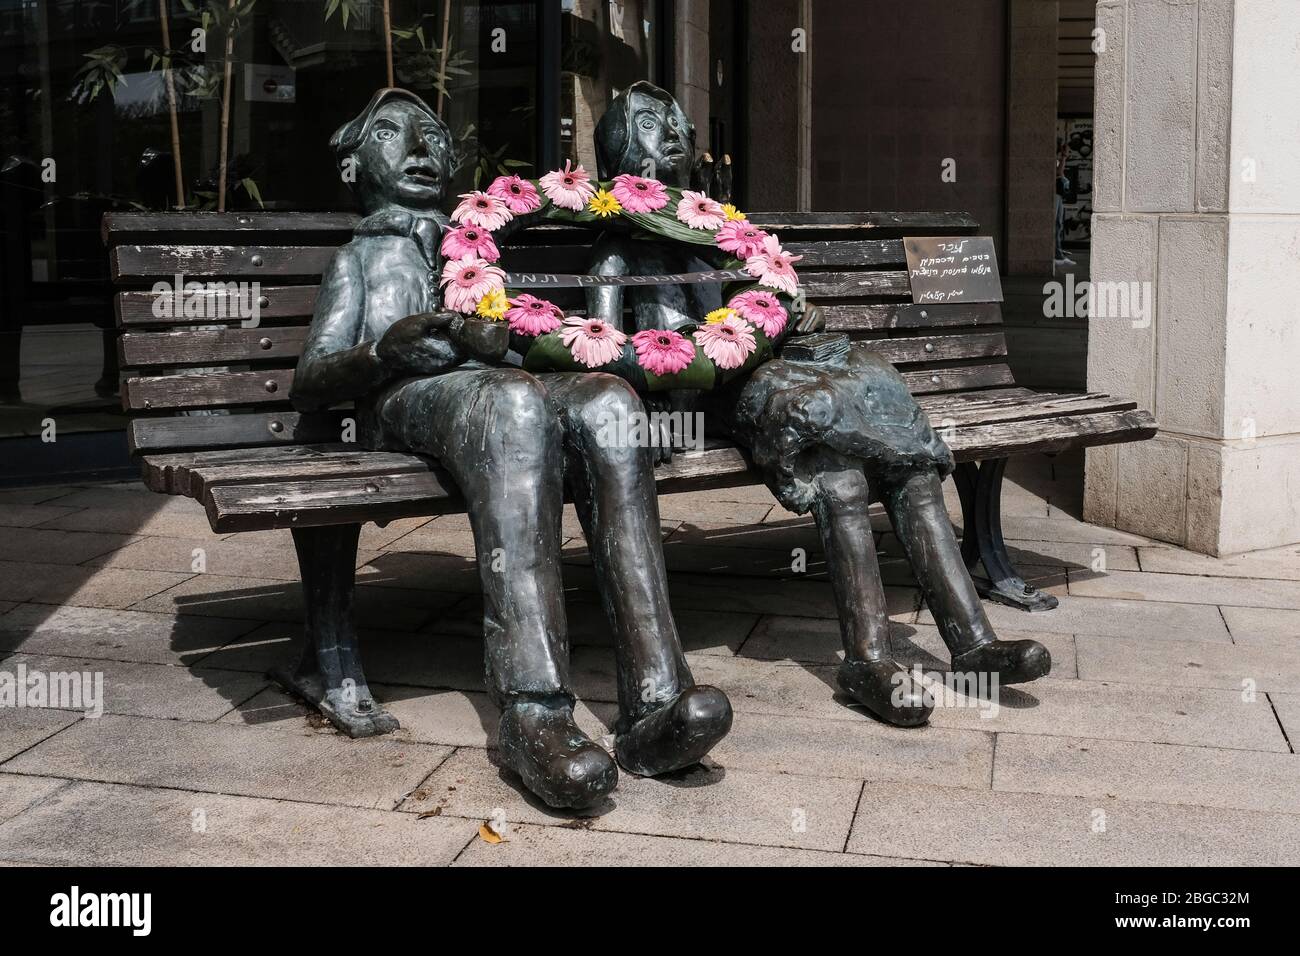 Jerusalem, Israel. 21st Apr, 2020. A flower wreath lies on a statue created by Dr. Martin Kizelstein, Holocaust survivor, in memory of grandmothers and grandfathers that perished in the Holocaust, on Holocaust and Heroism Remembrance Day. Credit: Nir Alon/Alamy Live News Stock Photo